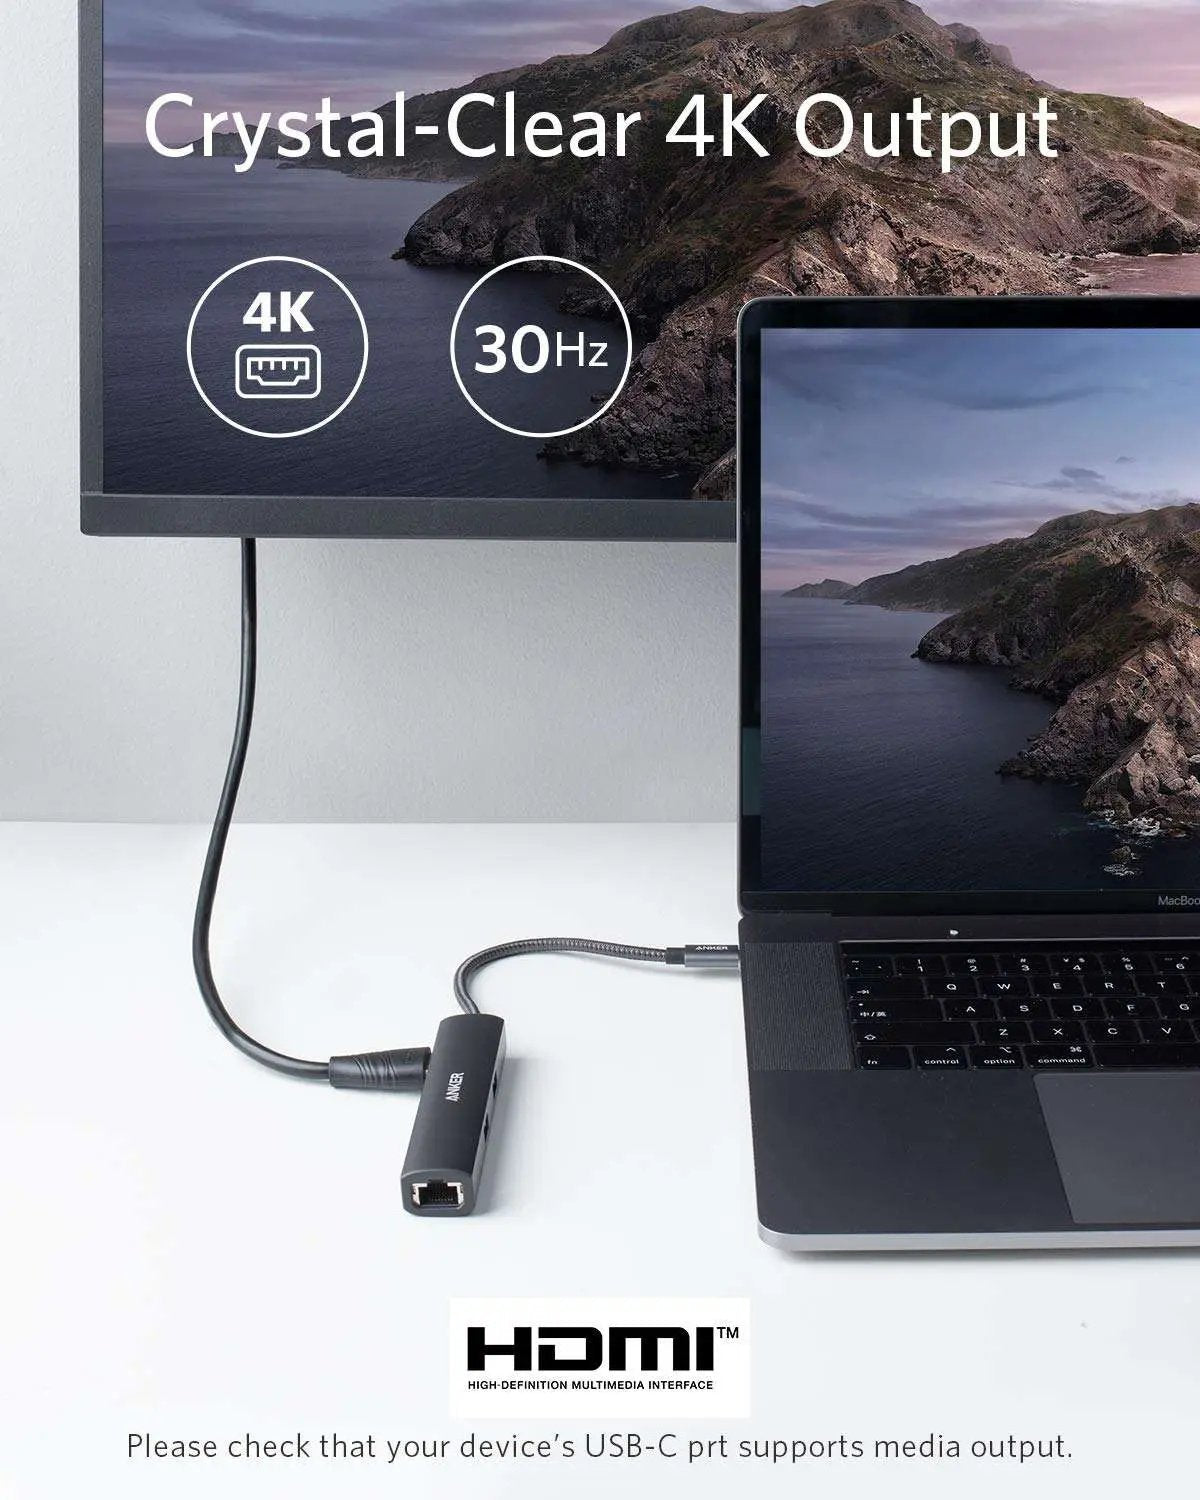 Anker USB C Hub Adapter, 5-in-1 USB C Adapter with 4K USB C to HDMI, Ethernet Port, 3 USB 3.0 Ports, for MacBook Pro, iPad Pro, XPS, Pixelbook, and More - A83380A1 - Hatke